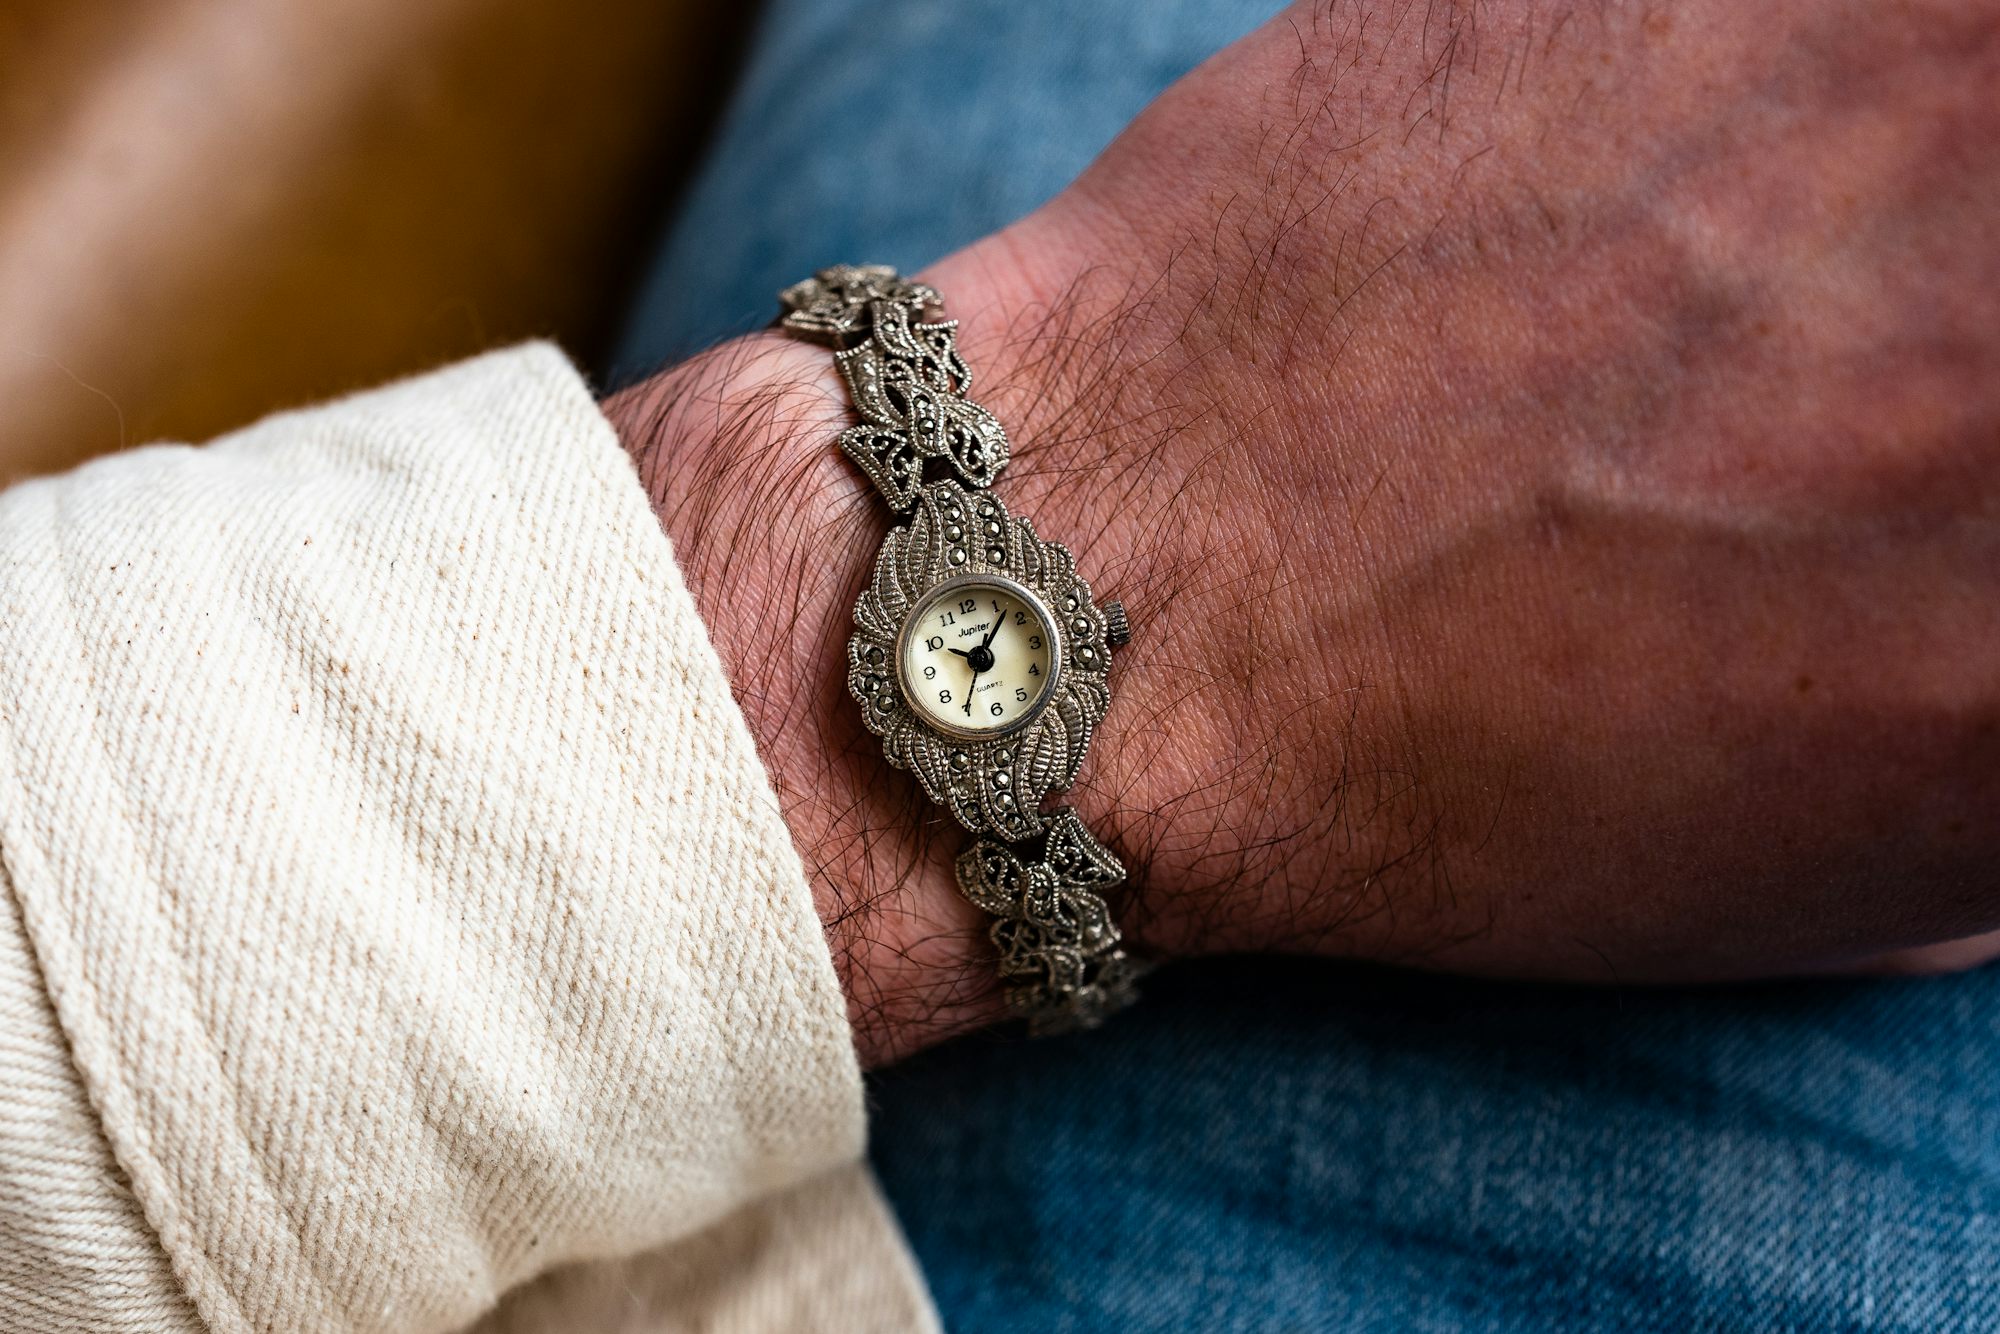 The Jupiter watch on the author's wrist. 